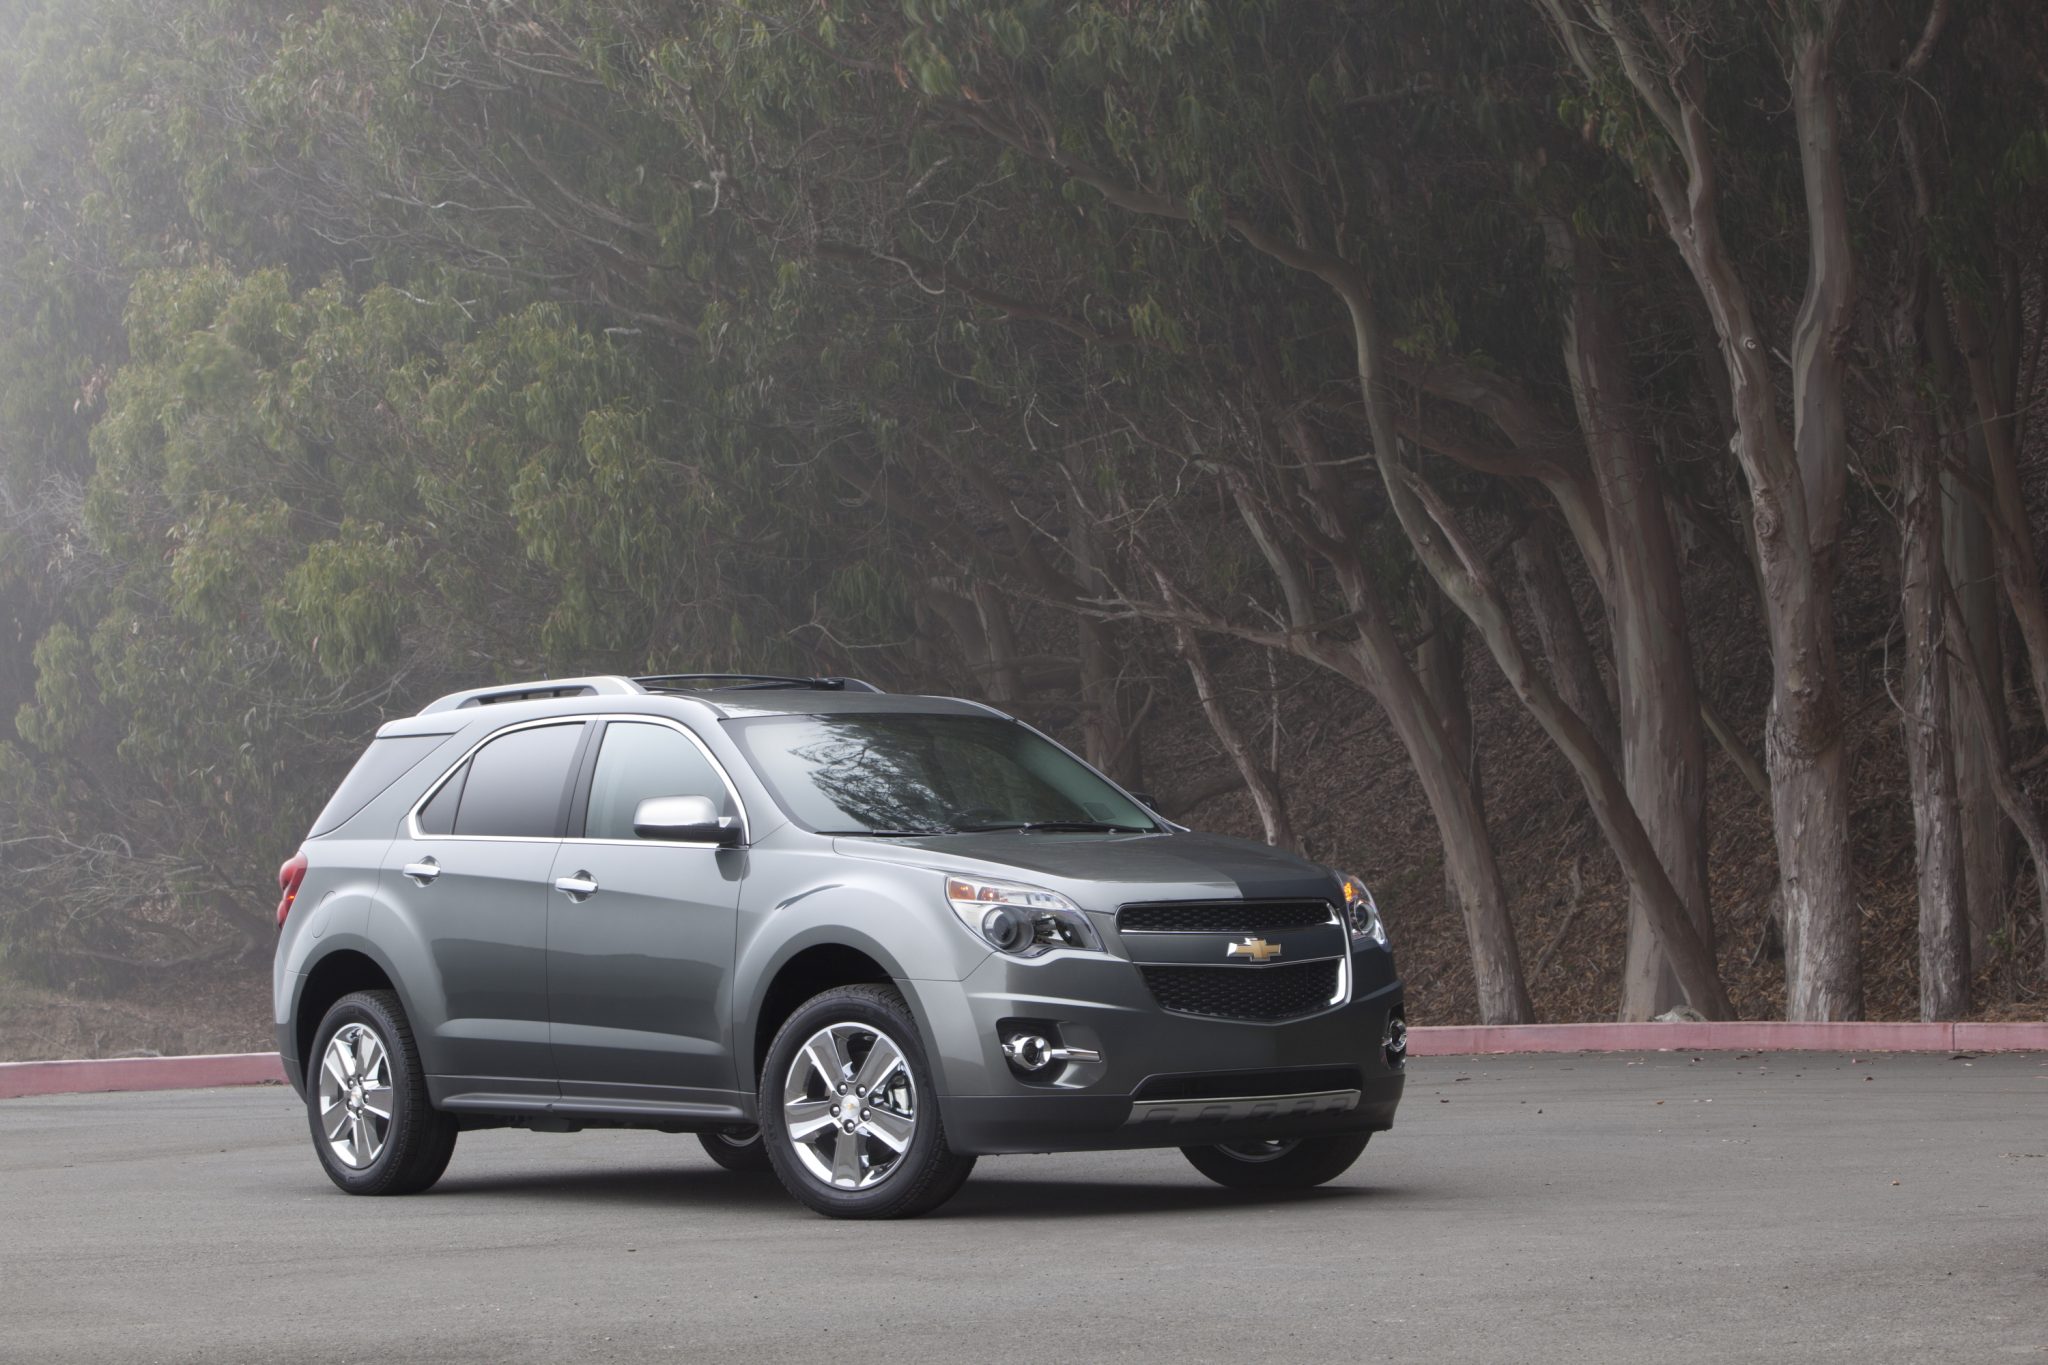 Updates for the 2015 Chevy Equinox